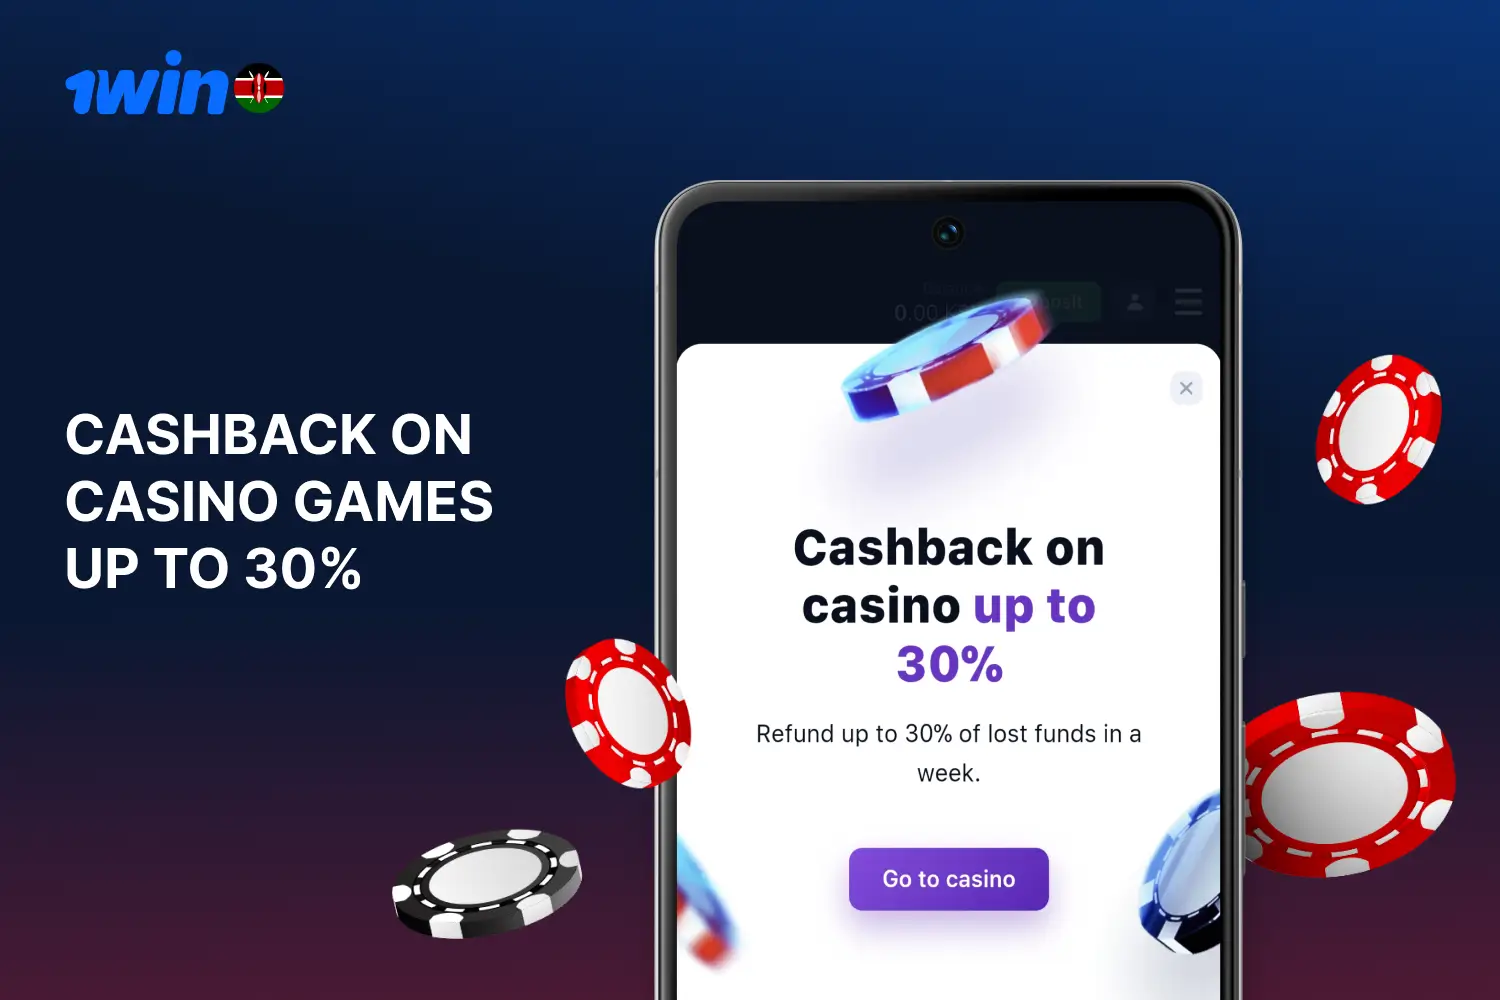 Kenyan players can get cashback on 1win casino games